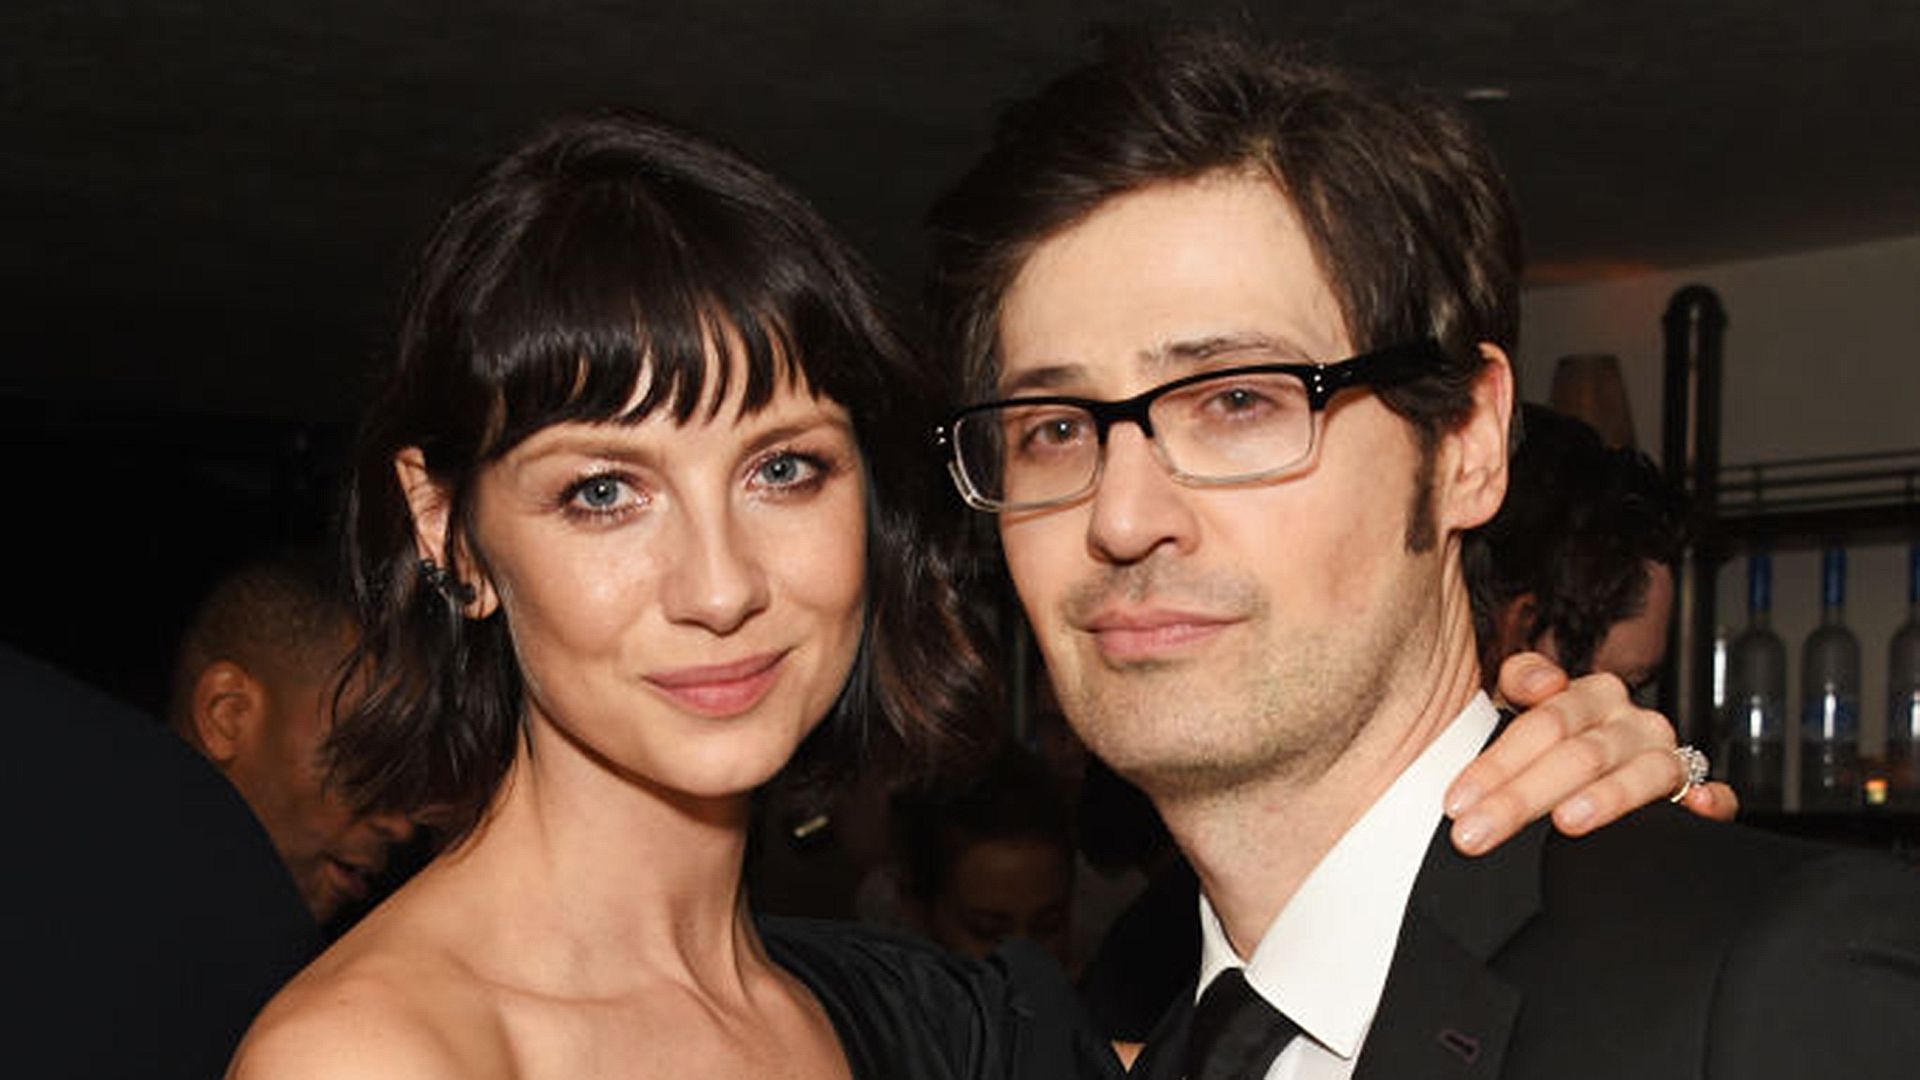 Caitriona Balfe and Tony McGill pose together for a photo